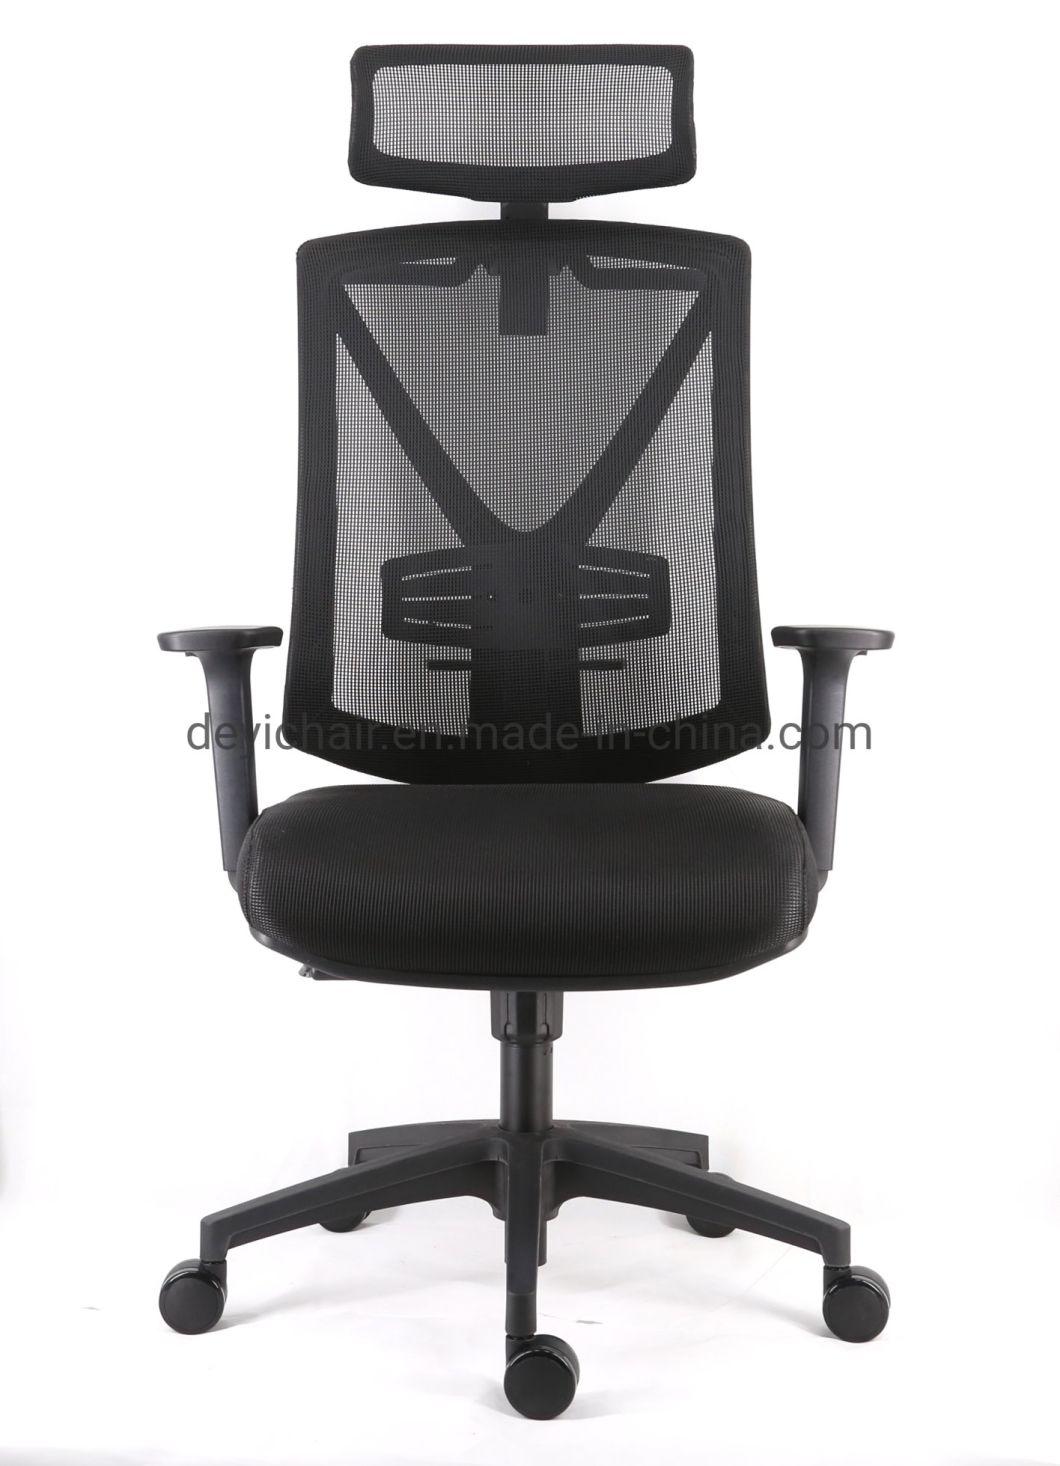 Simple Function Seat up and Down Mechanism Mesh Upholstery Backrest with Lumbar Support Adjustable Armrest Nylon Base Chair